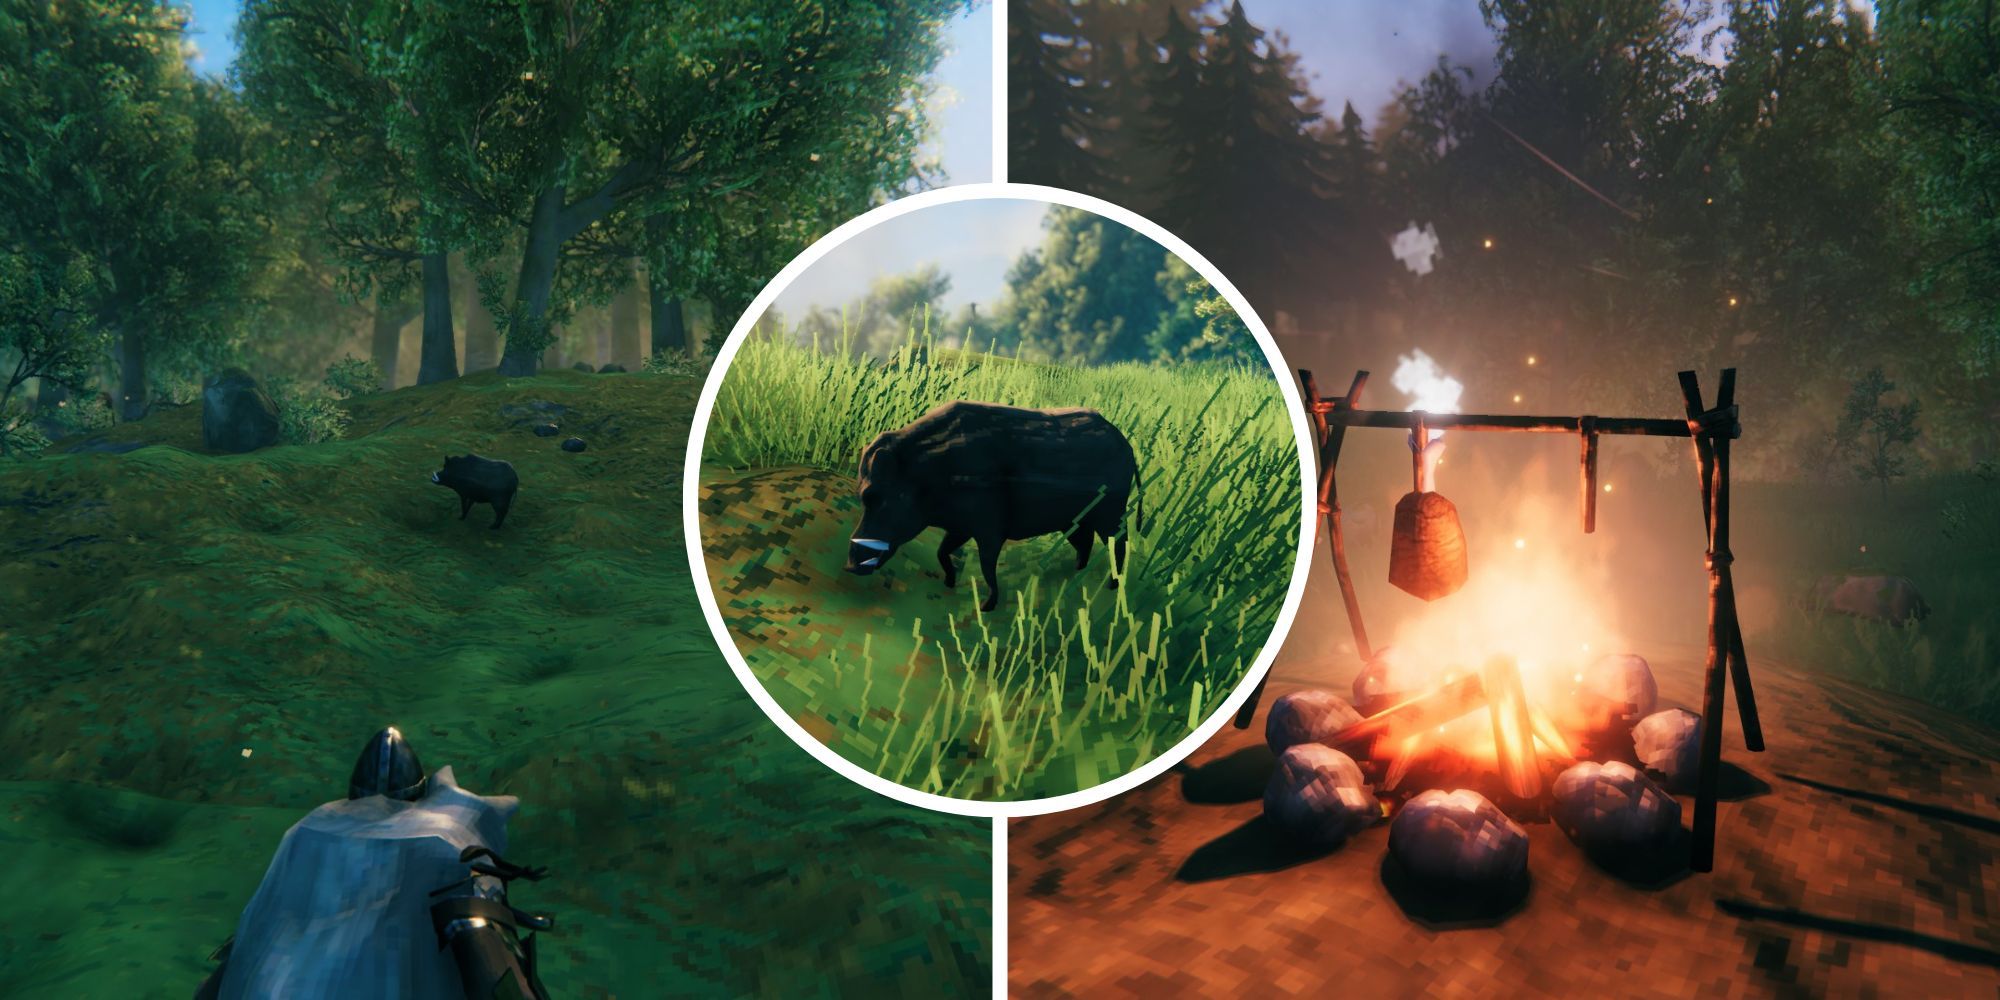 The player stars at a Boar, a Boar grazes on grass, and Boar Meat roasts on a fire in the Meadows.